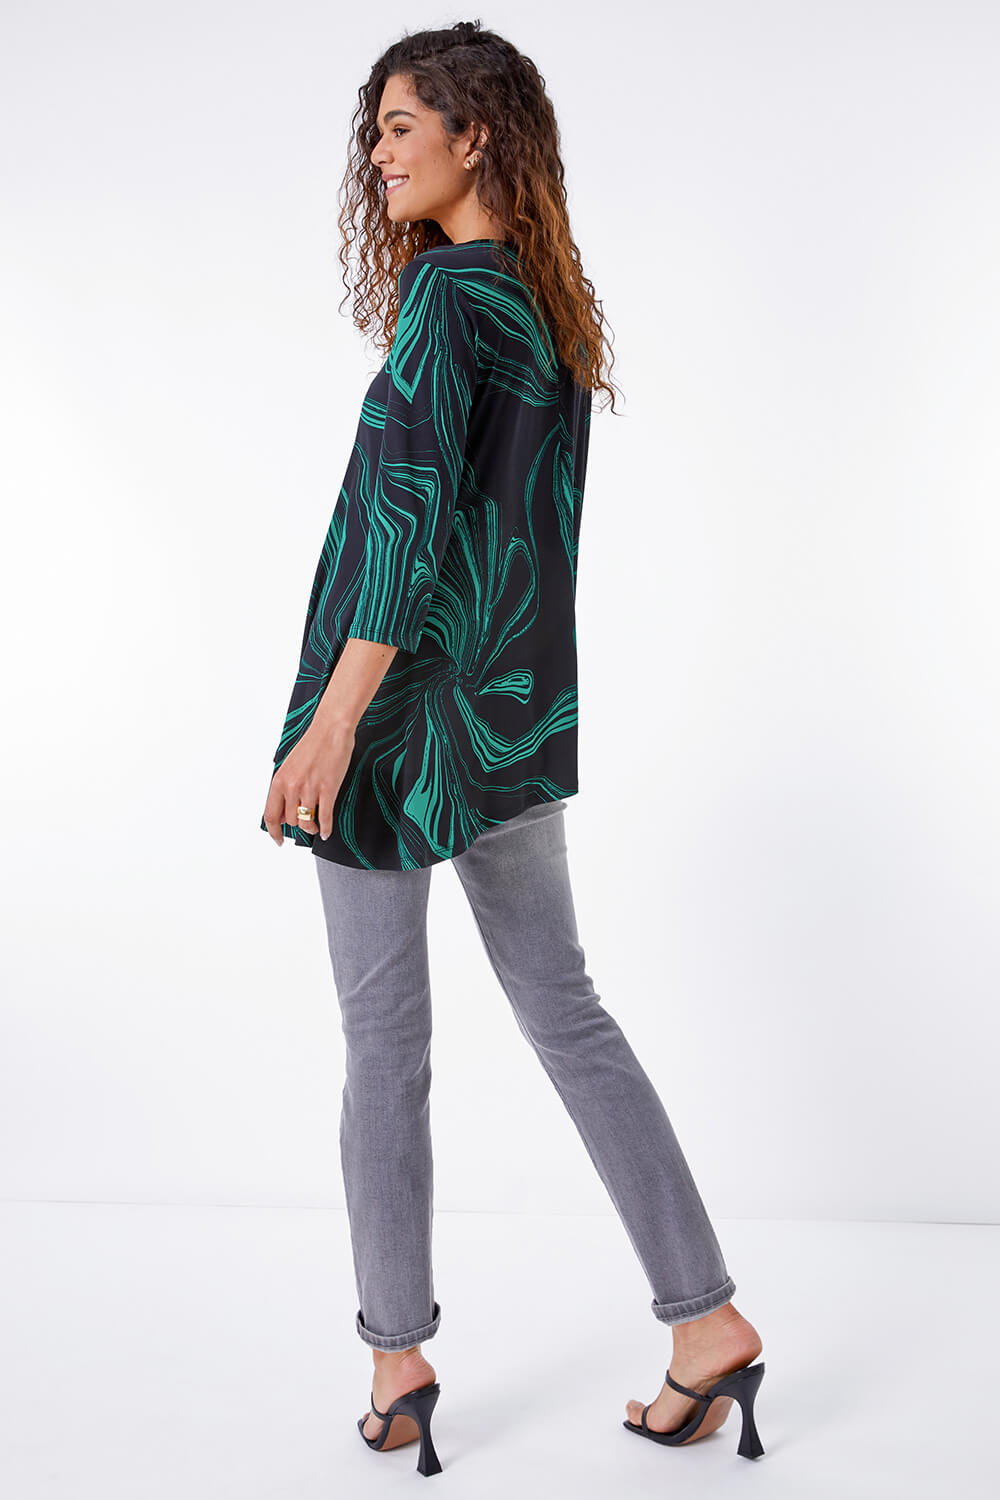 Green Abstract Print Swing Stretch Top, Image 5 of 5